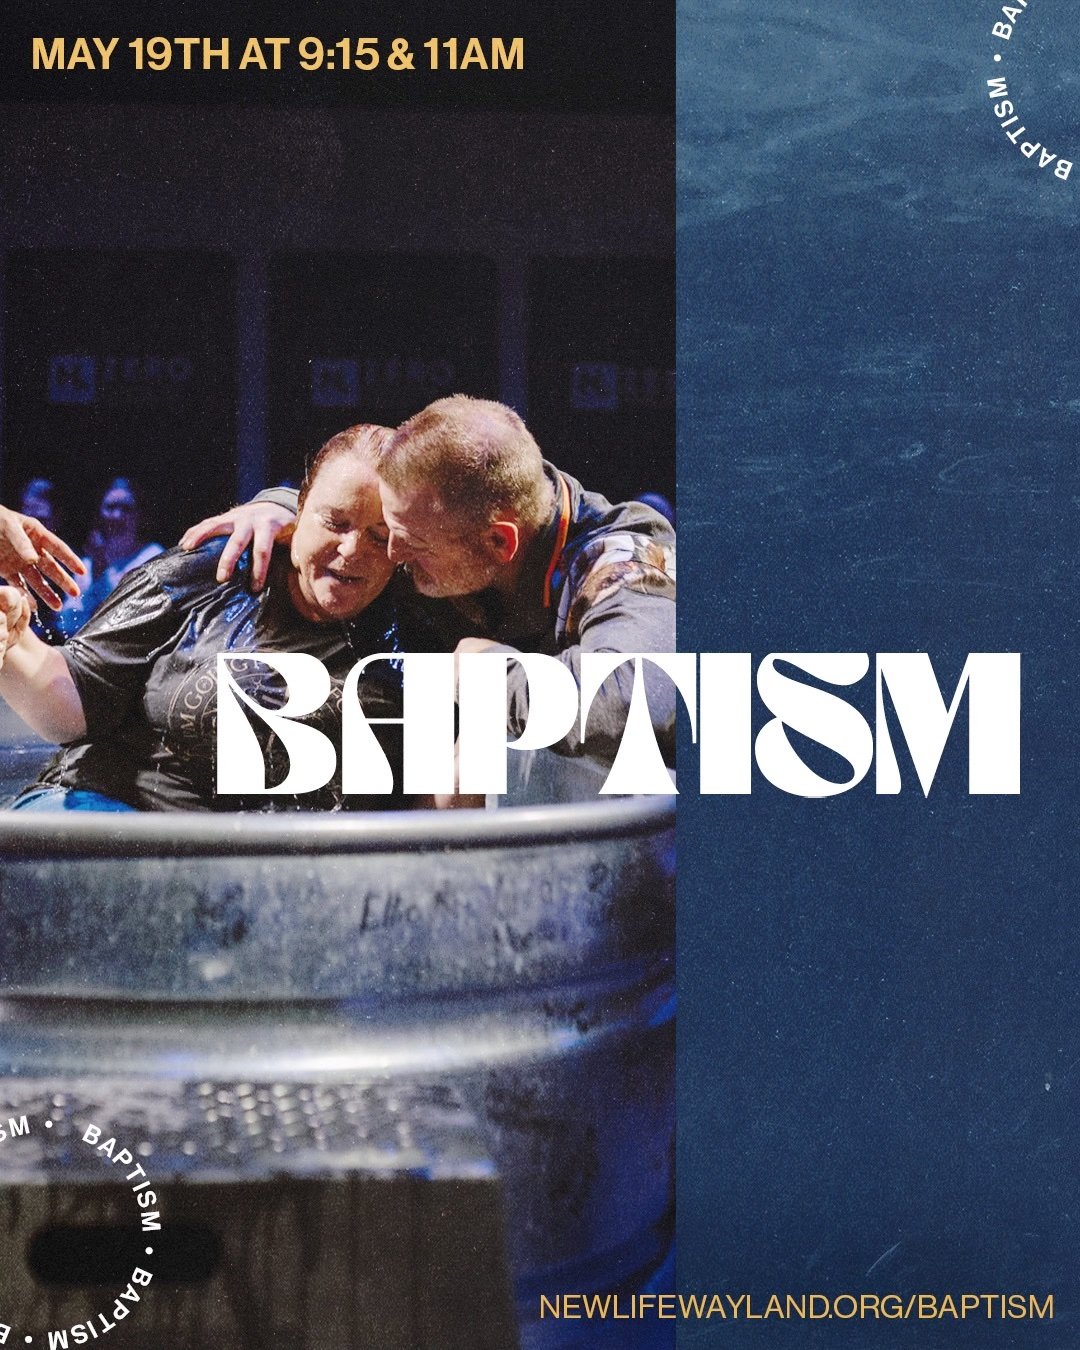 Our next baptism service is next month on May 19th! 

Baptism is a public expression of an inward faith in Christ and the desire to follow Him. Jesus was baptized so we, as believers, want to follow His example.

Sign up at: https://zerocollective.ch